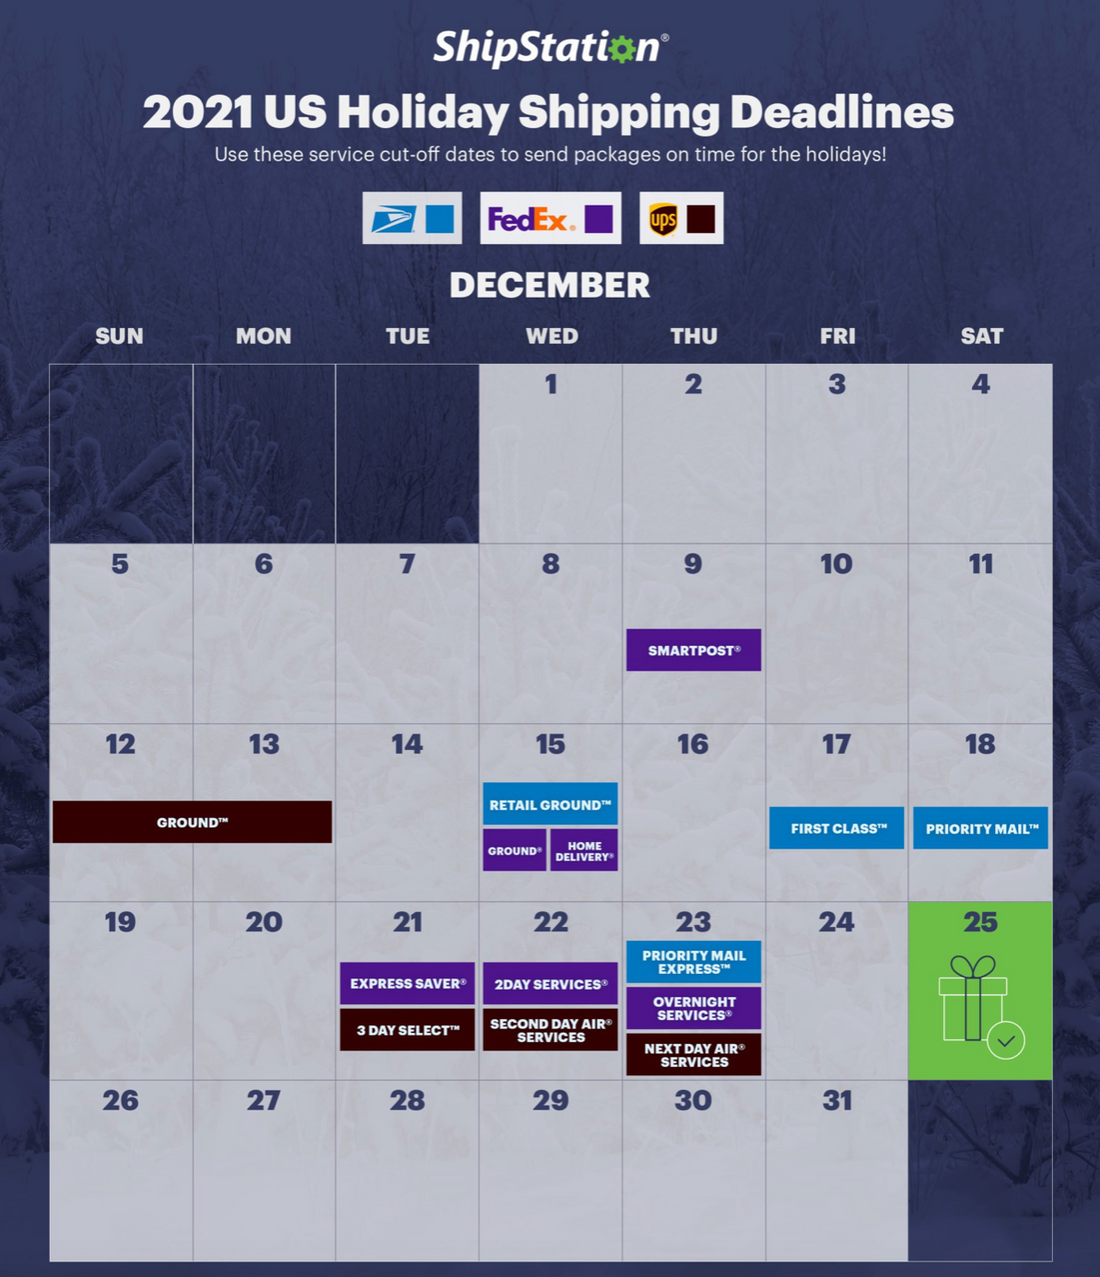 Shipstation Holiday Shipping Deadlines